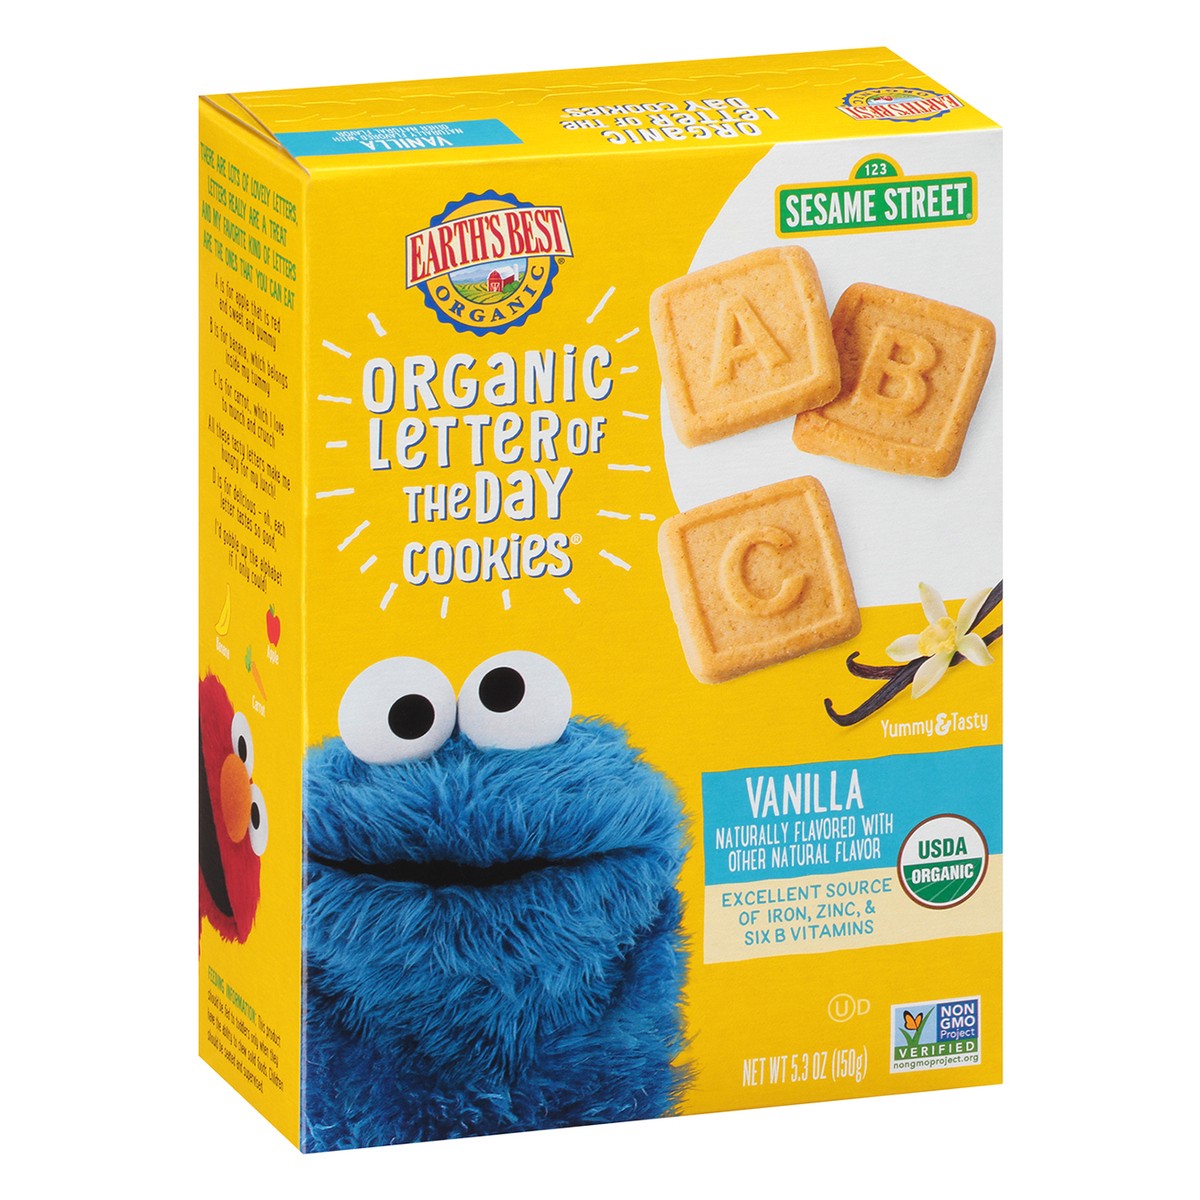 slide 2 of 8, Sesame Street Earth's Best Organic Letter Of The Day Very Vanilla Cookies, 5.3 oz